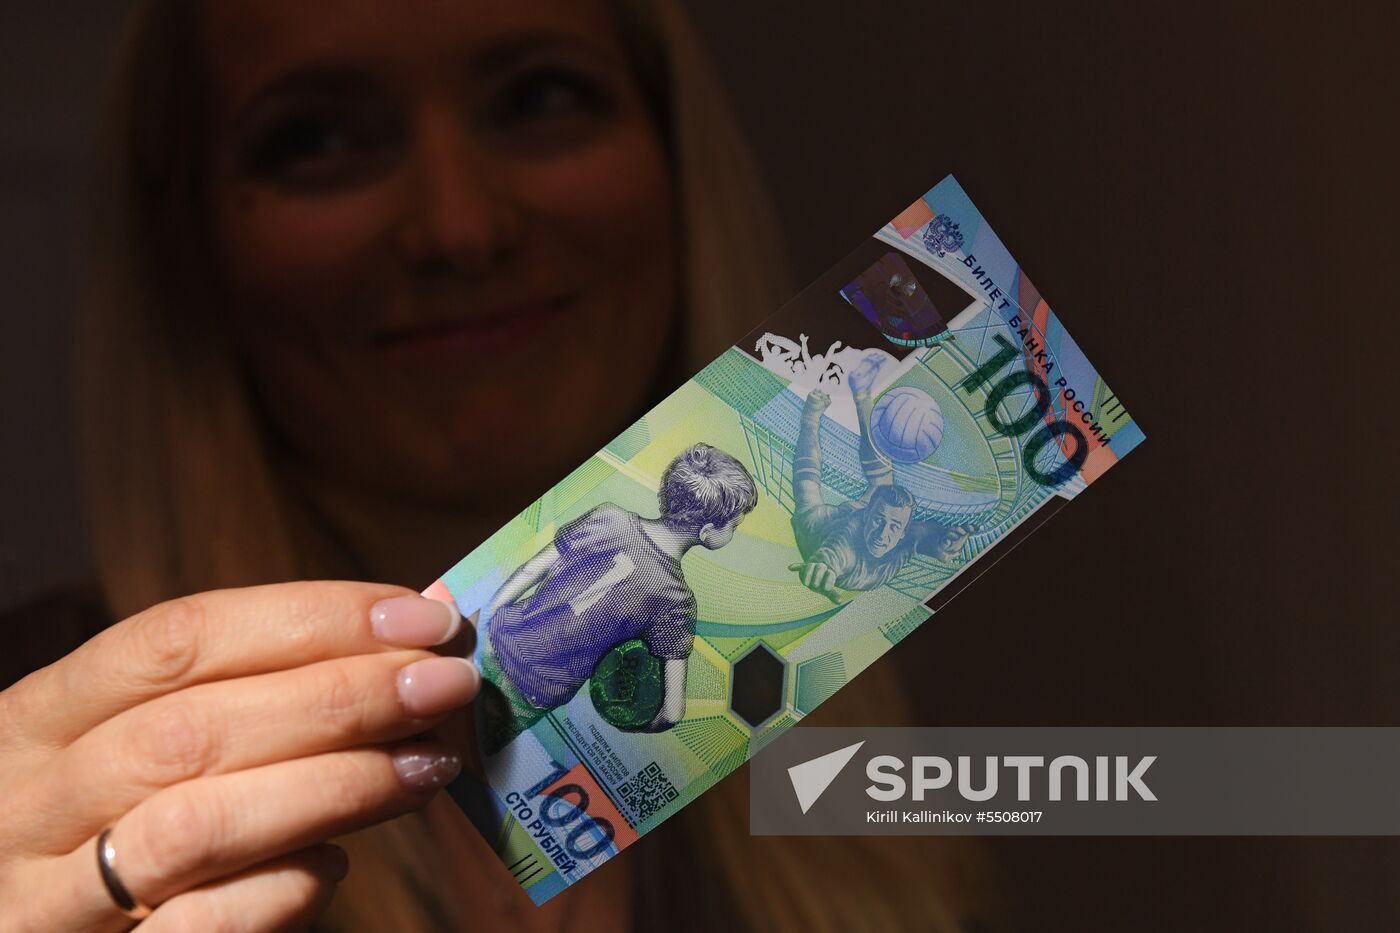 Bank of Russia issues 2018 FIFA World Cup banknote